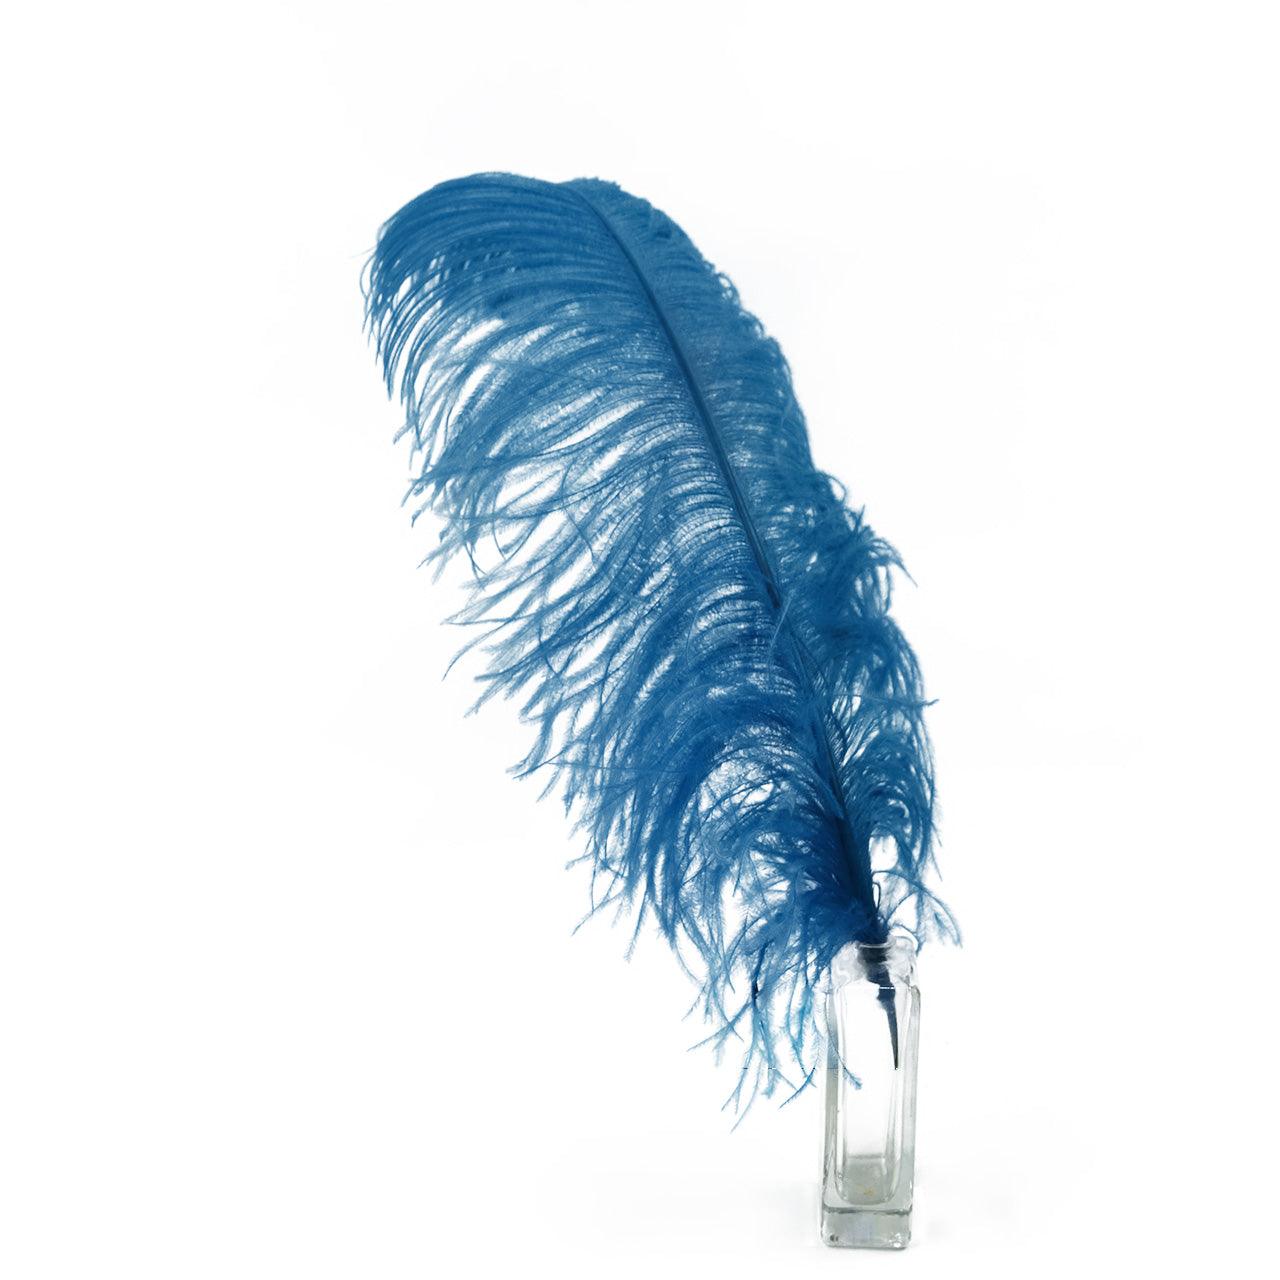 White Long Ostrich Wing Feathers Plume